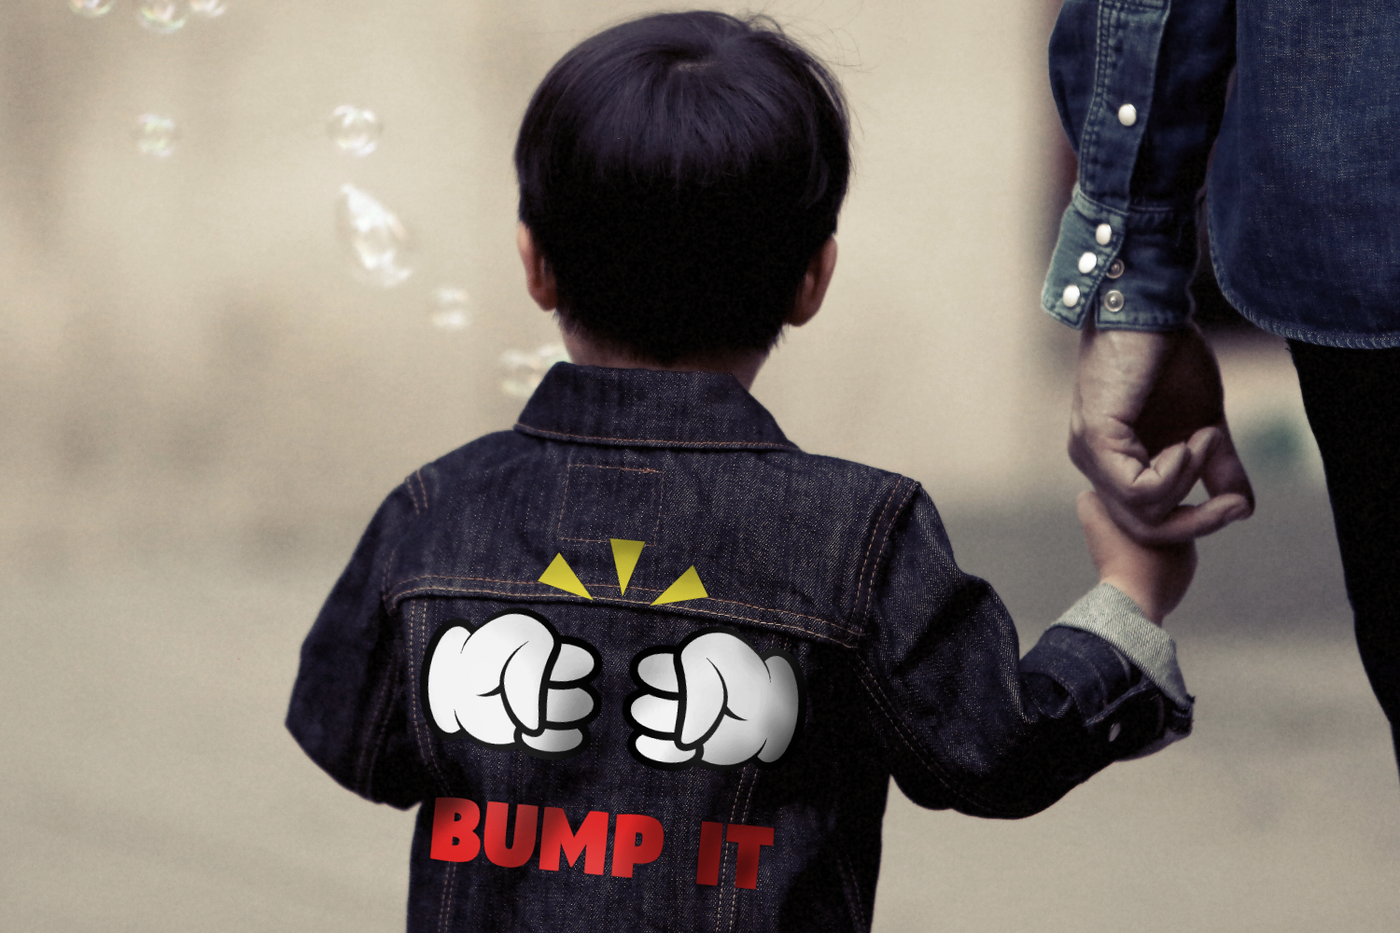 An Asian toddler holds the hand of an adult and is seen from behind. He wears a denim jacket with a design of two white gloved cartoon fists doing a fist bump. The text below says "bump it" and above are 3 yellow triangles.